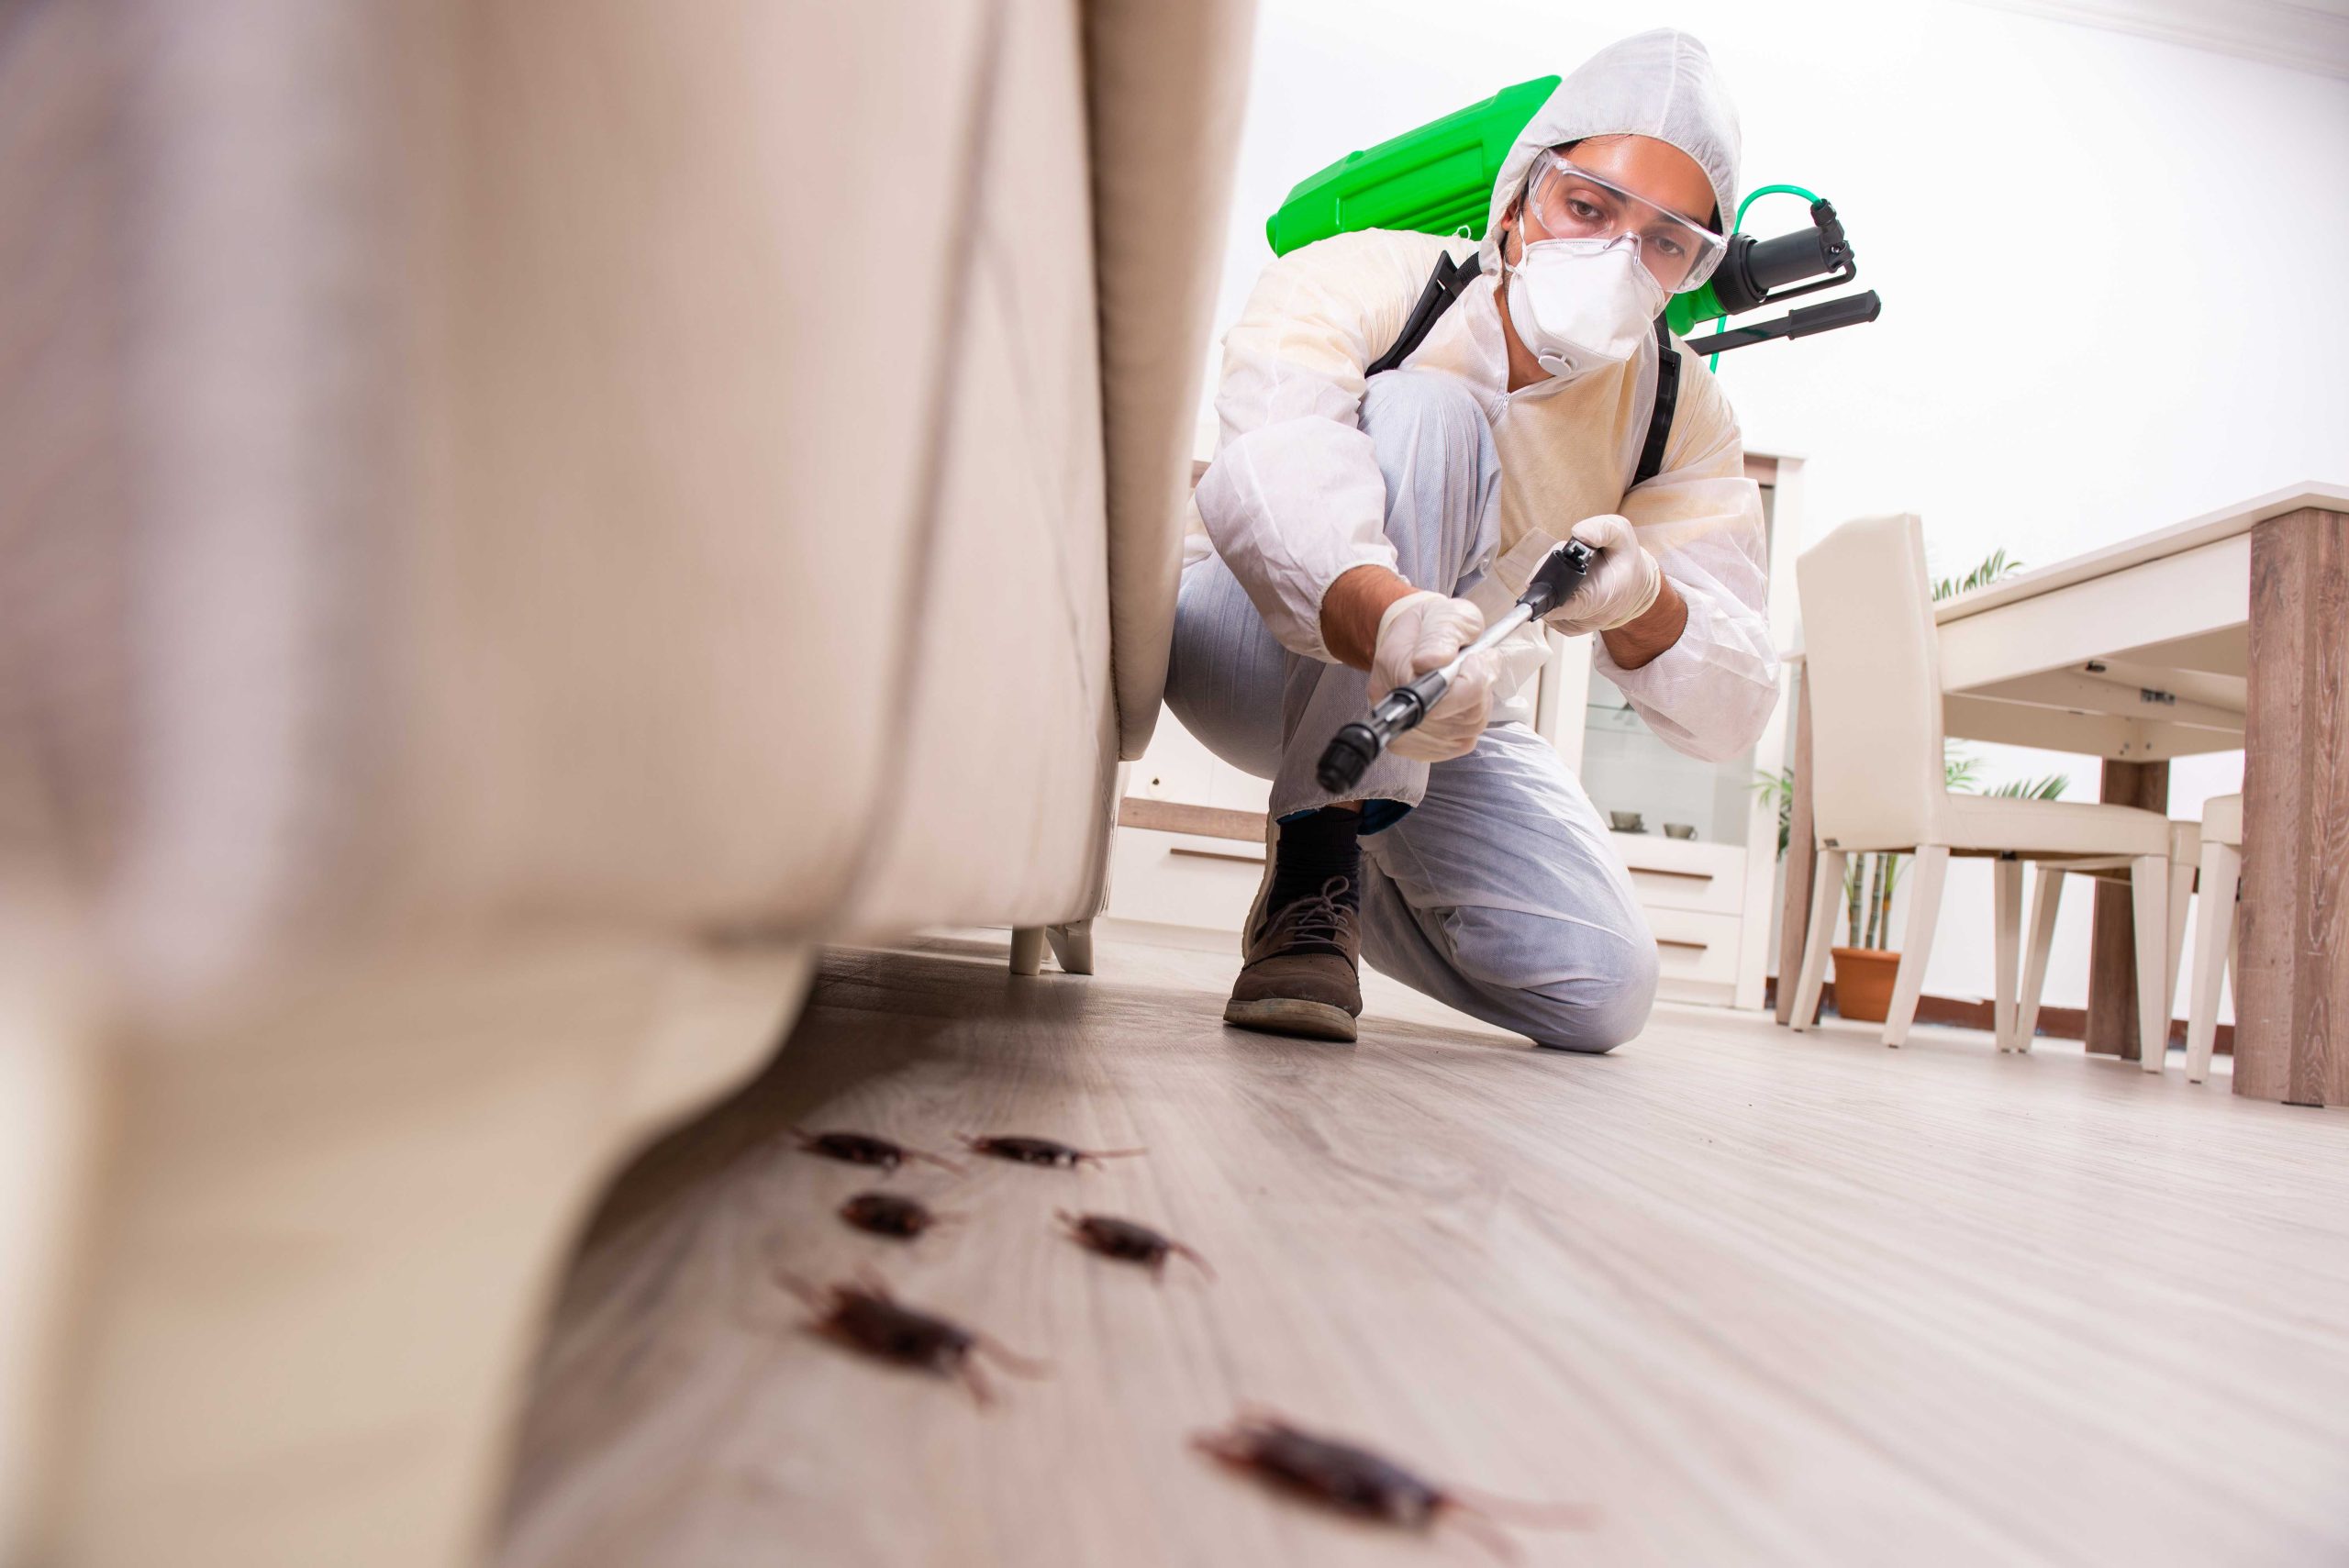 Pest-Control experts in Murfreesboro specializing in prevention and eradication of various pests. Don't let pests damage your property and endanger your health.